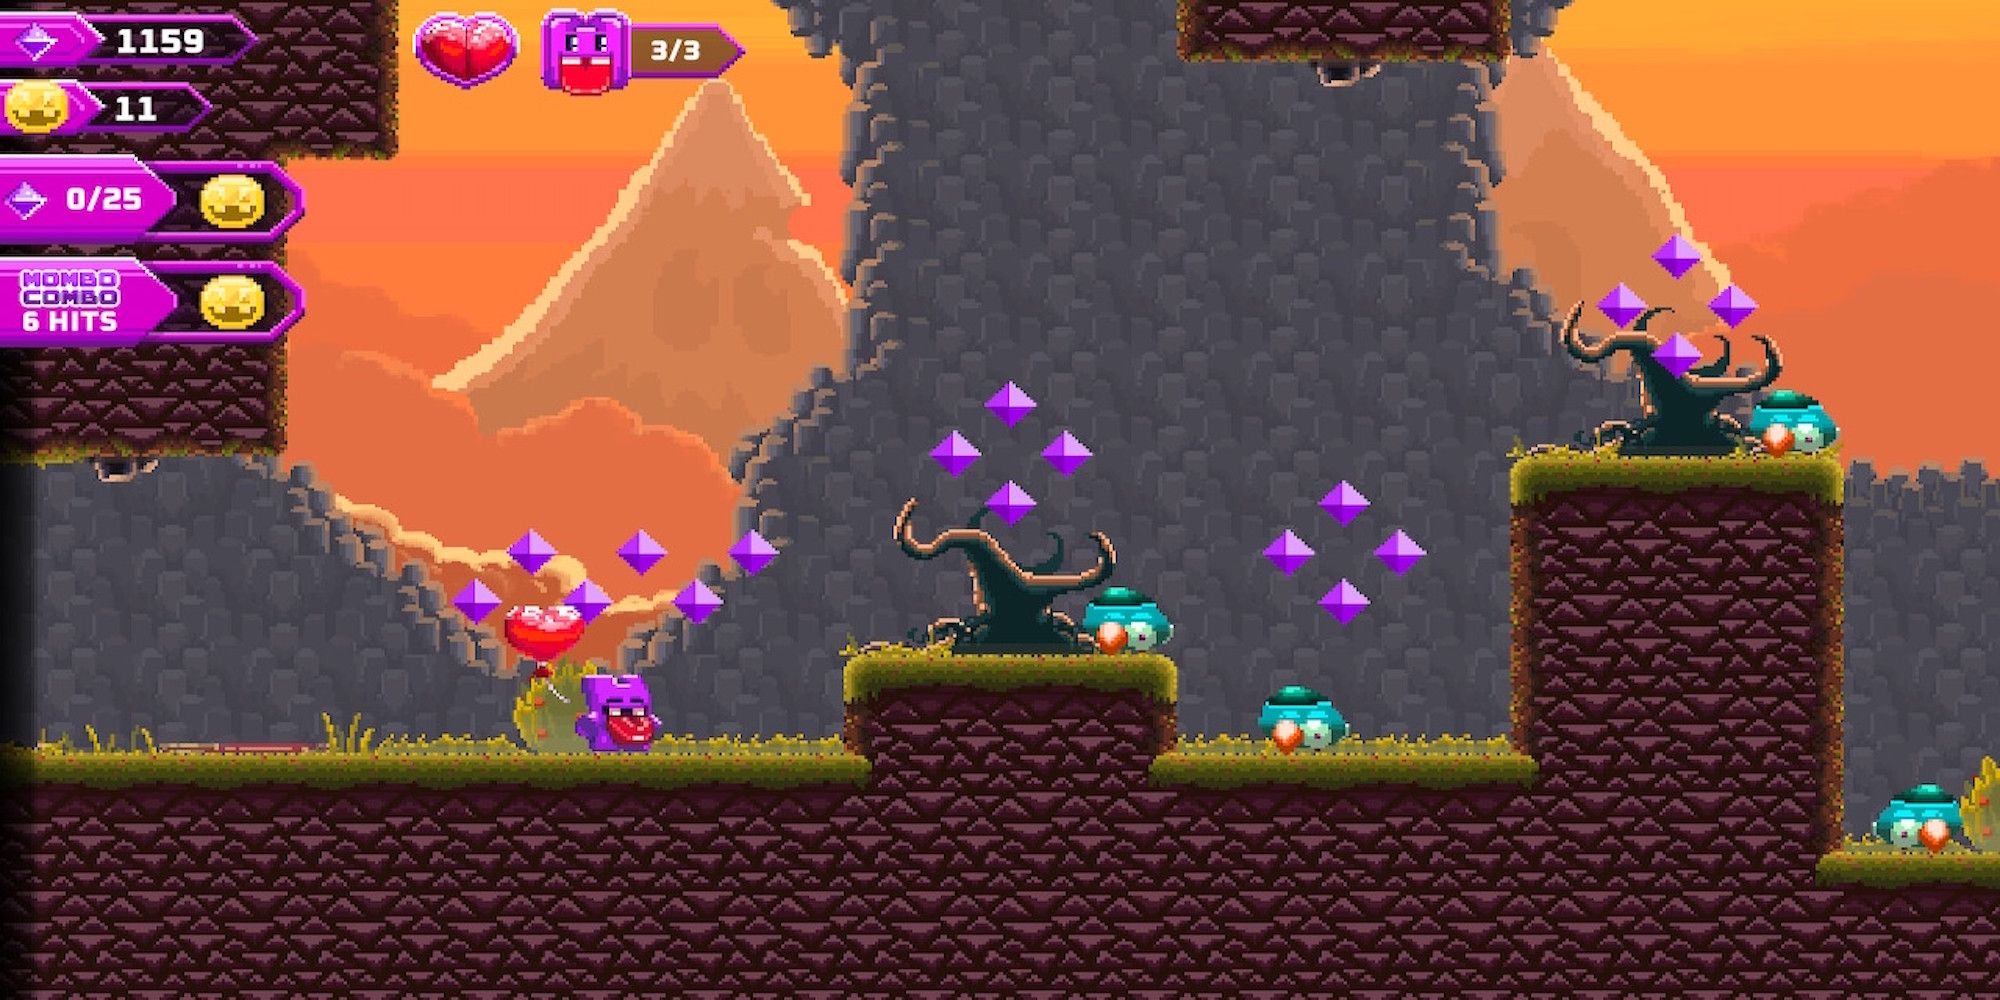 Playing a level in Super Mombo Quest